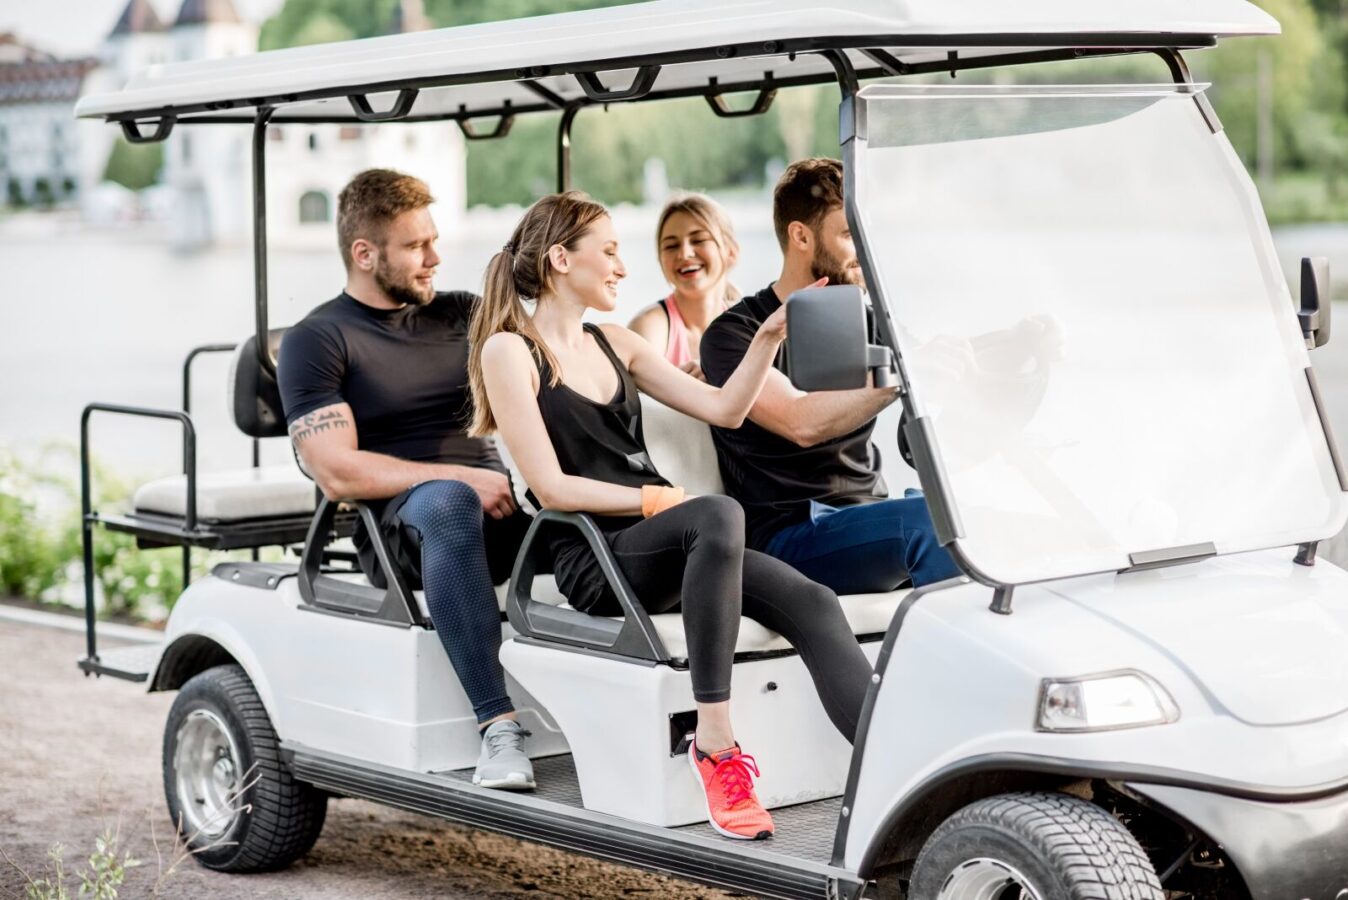 Group of friends in a golf cart.